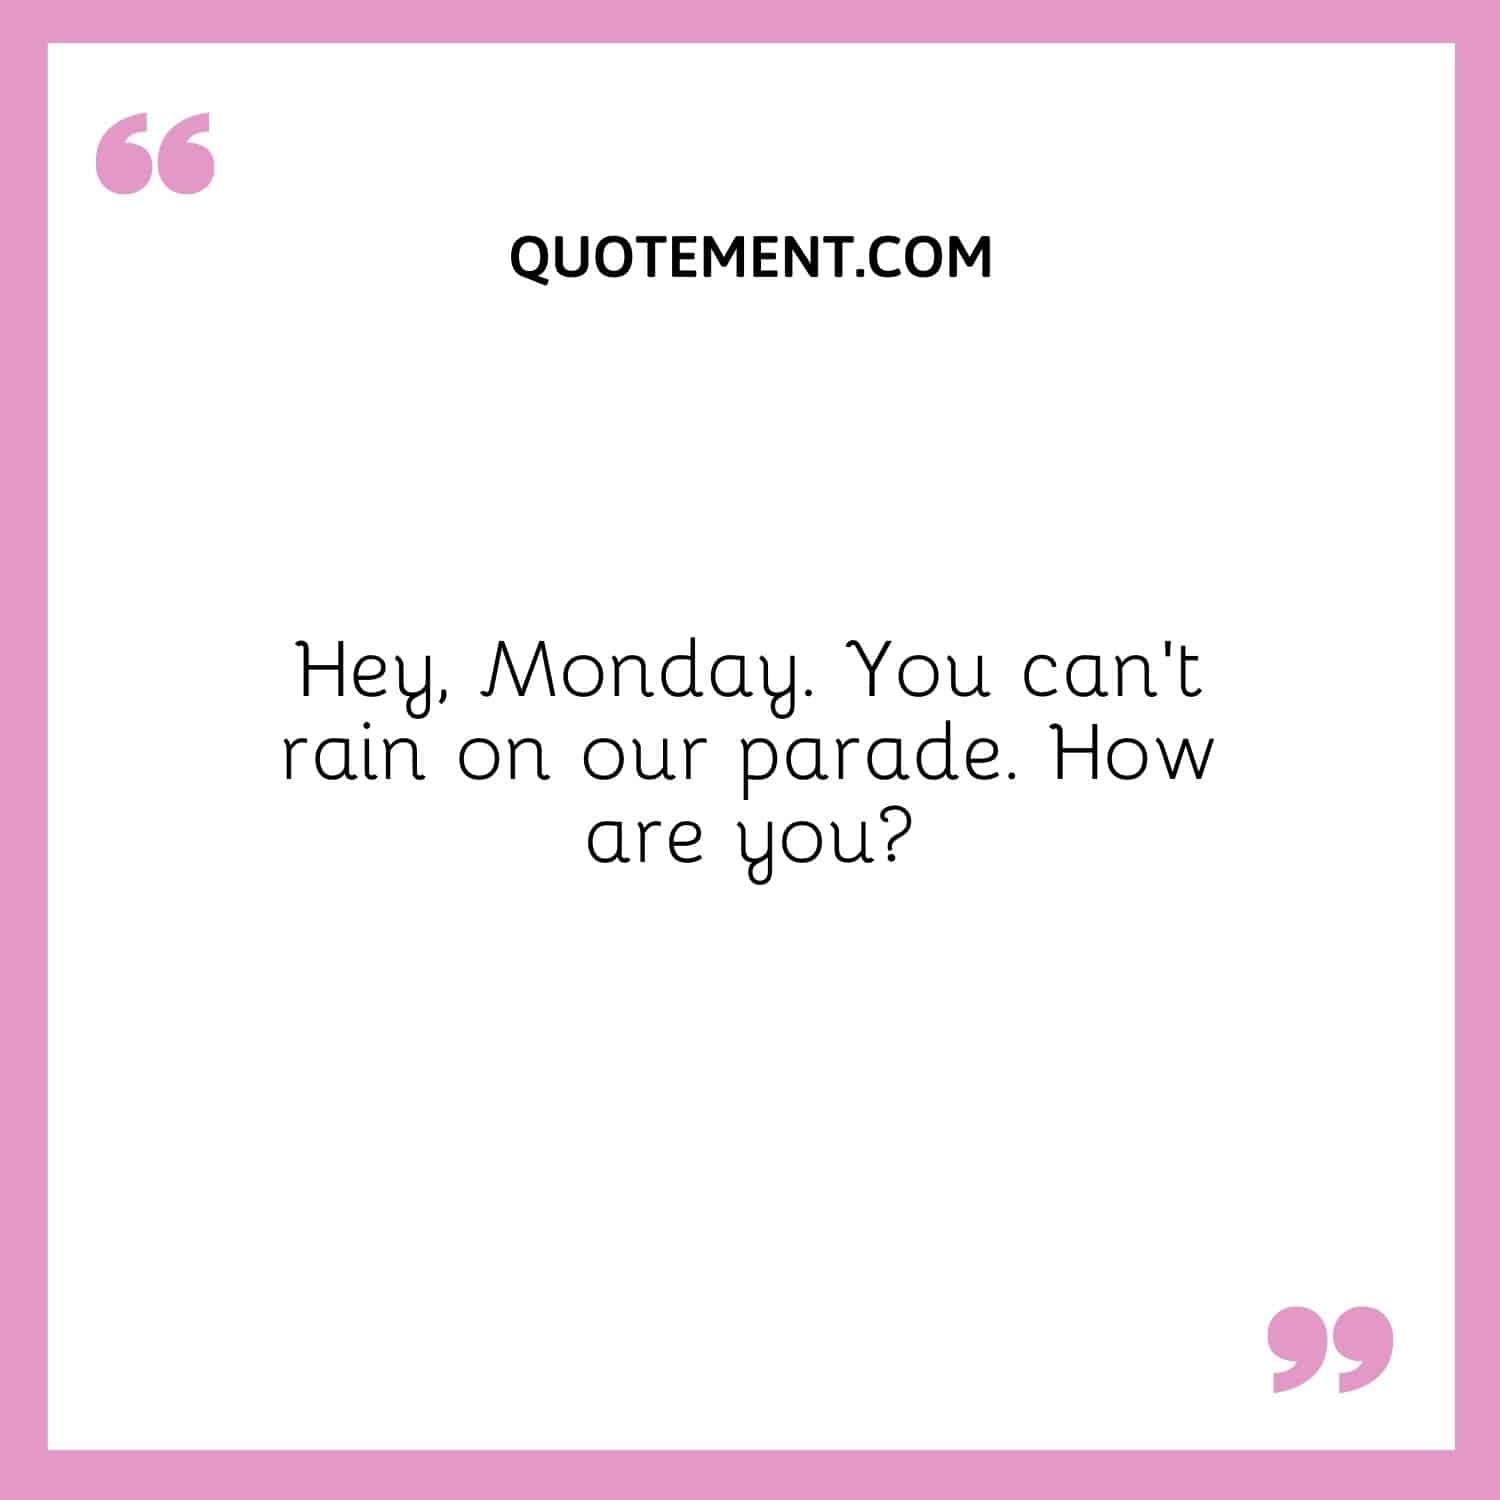 Hey, Monday. You can’t rain on our parade.